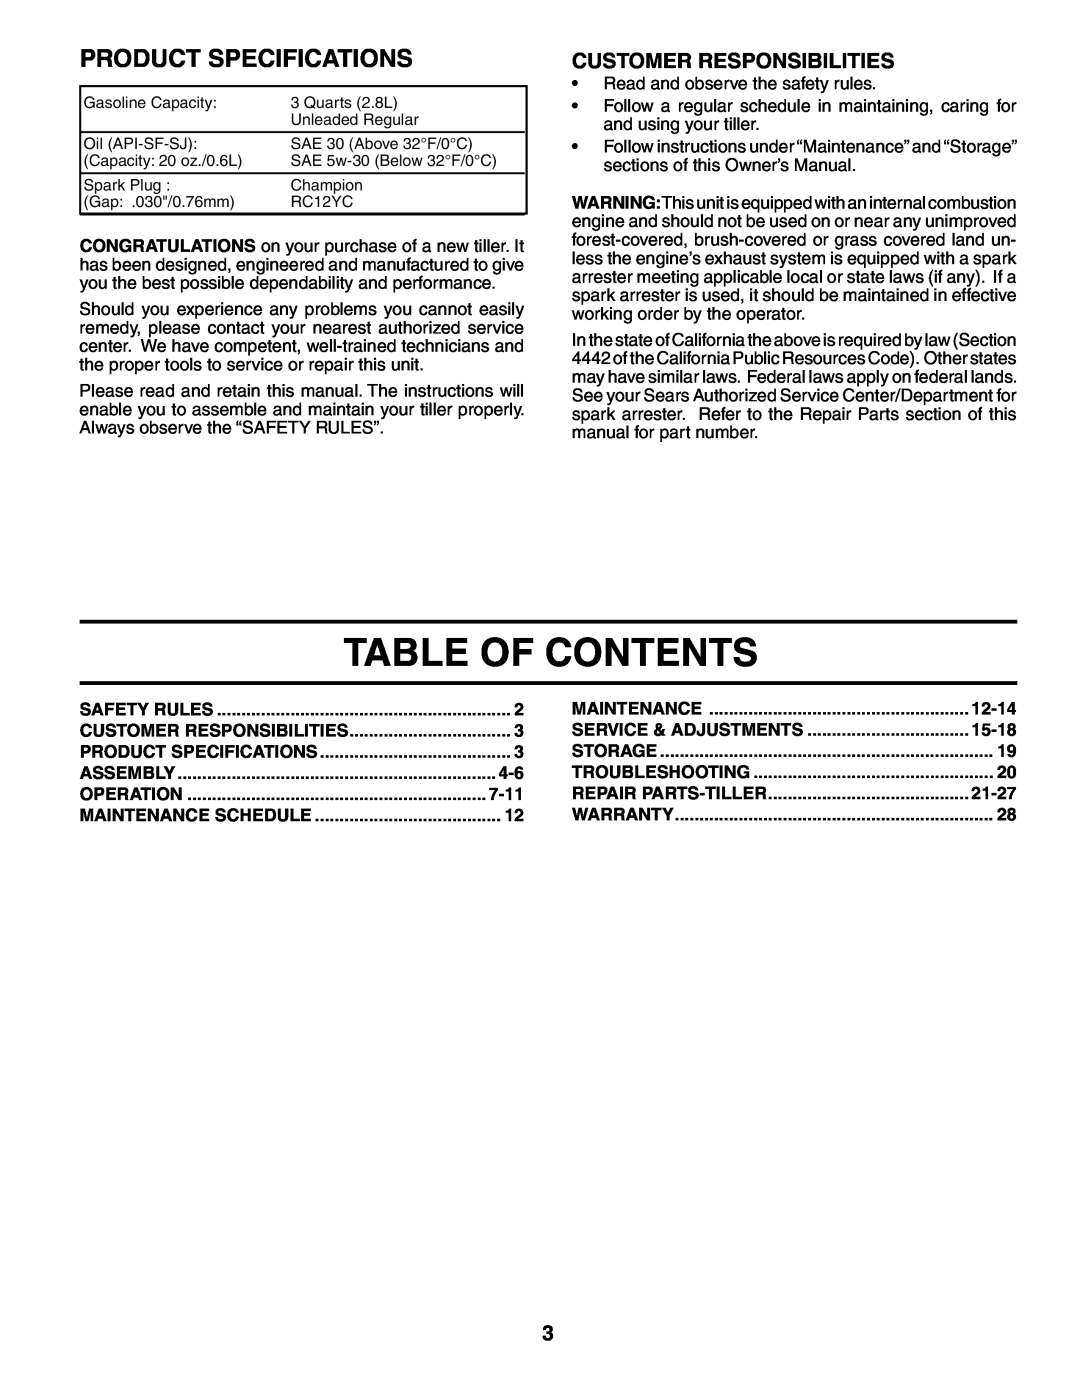 Poulan HDR500L owner manual Table Of Contents, Product Specifications, Customer Responsibilities 